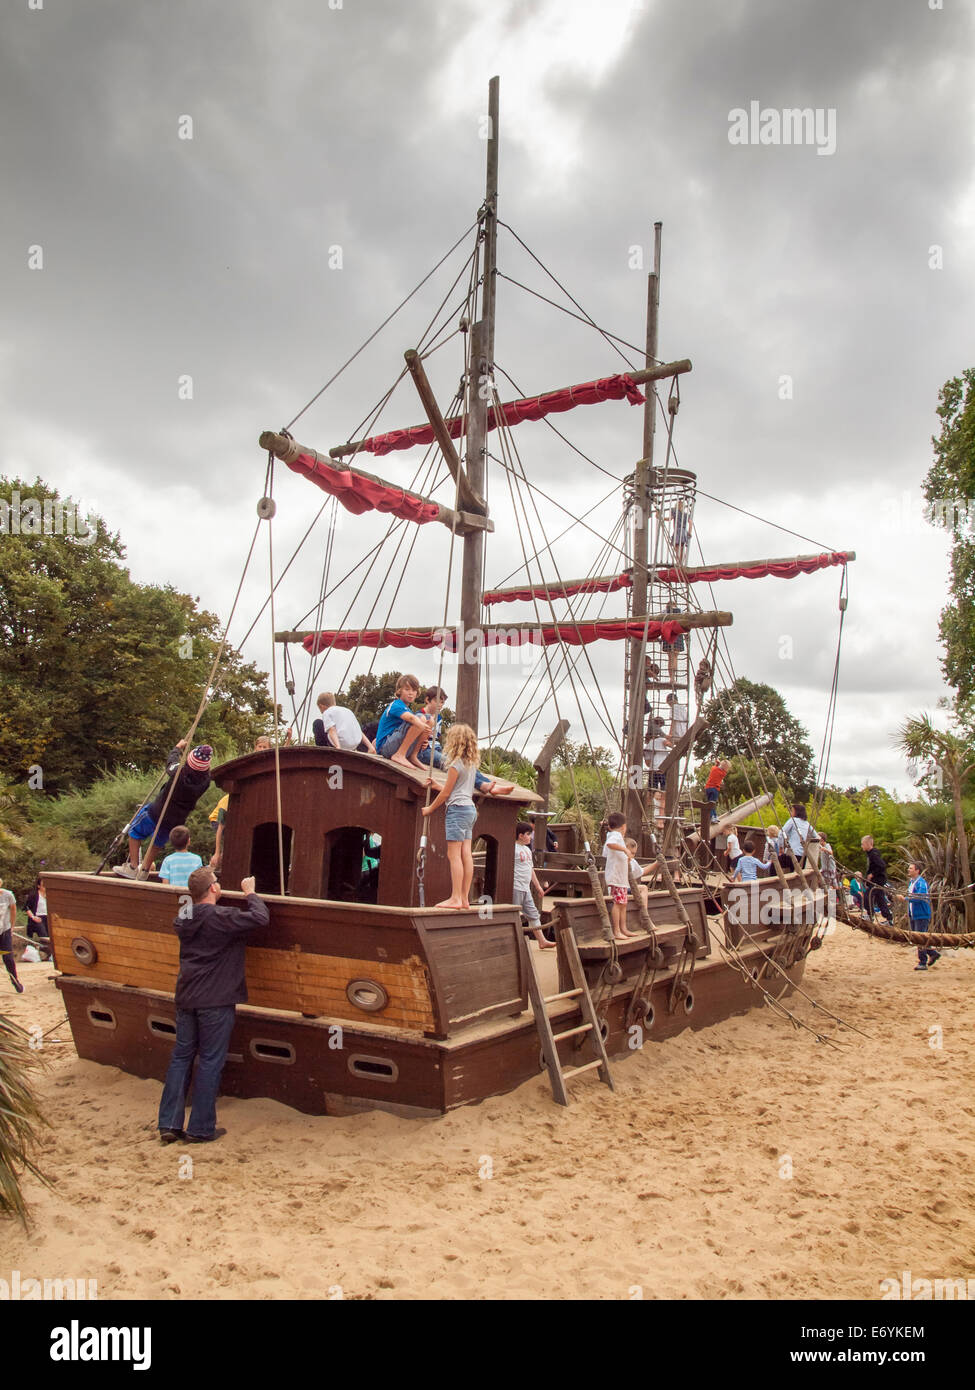 children playing on the pirate ship Diana's memorial playground kensington gardens london on an overcast cloudy day Stock Photo